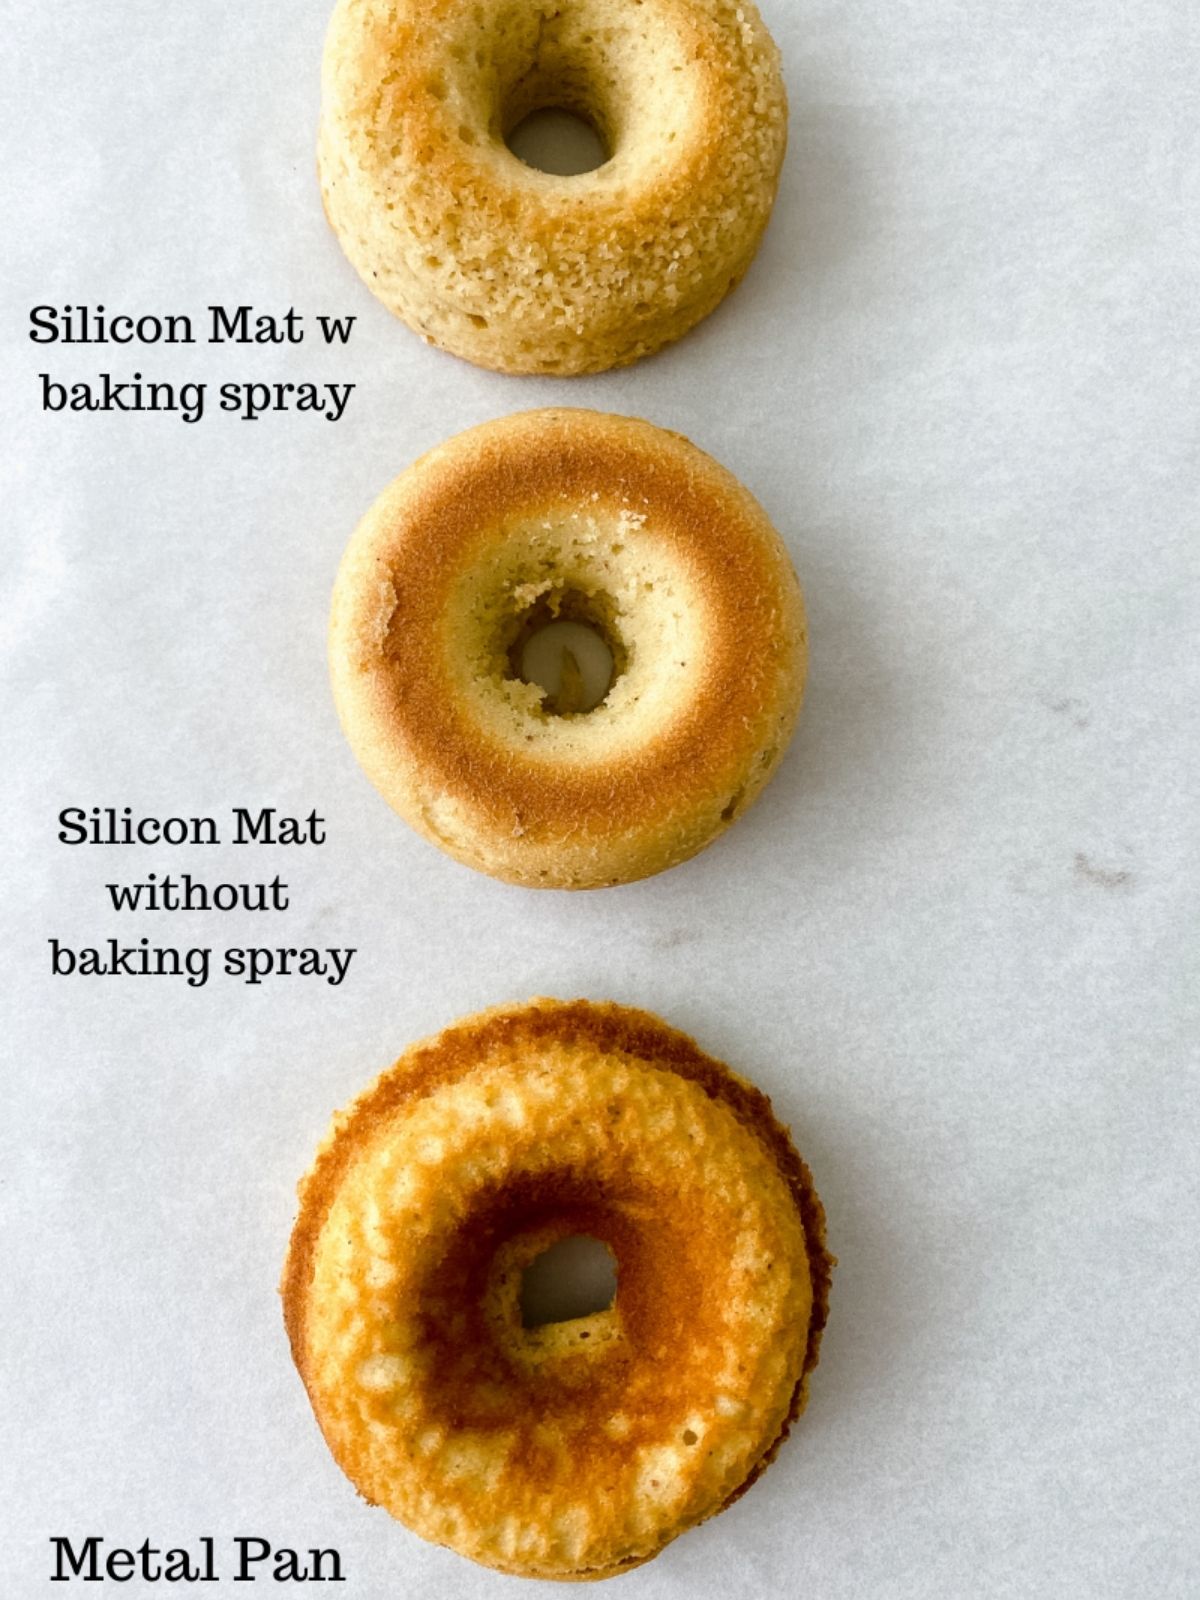 three donuts baked differently. One with a silicone mat with cooking spray, one with no cooking spray, and one baked in a metal pan